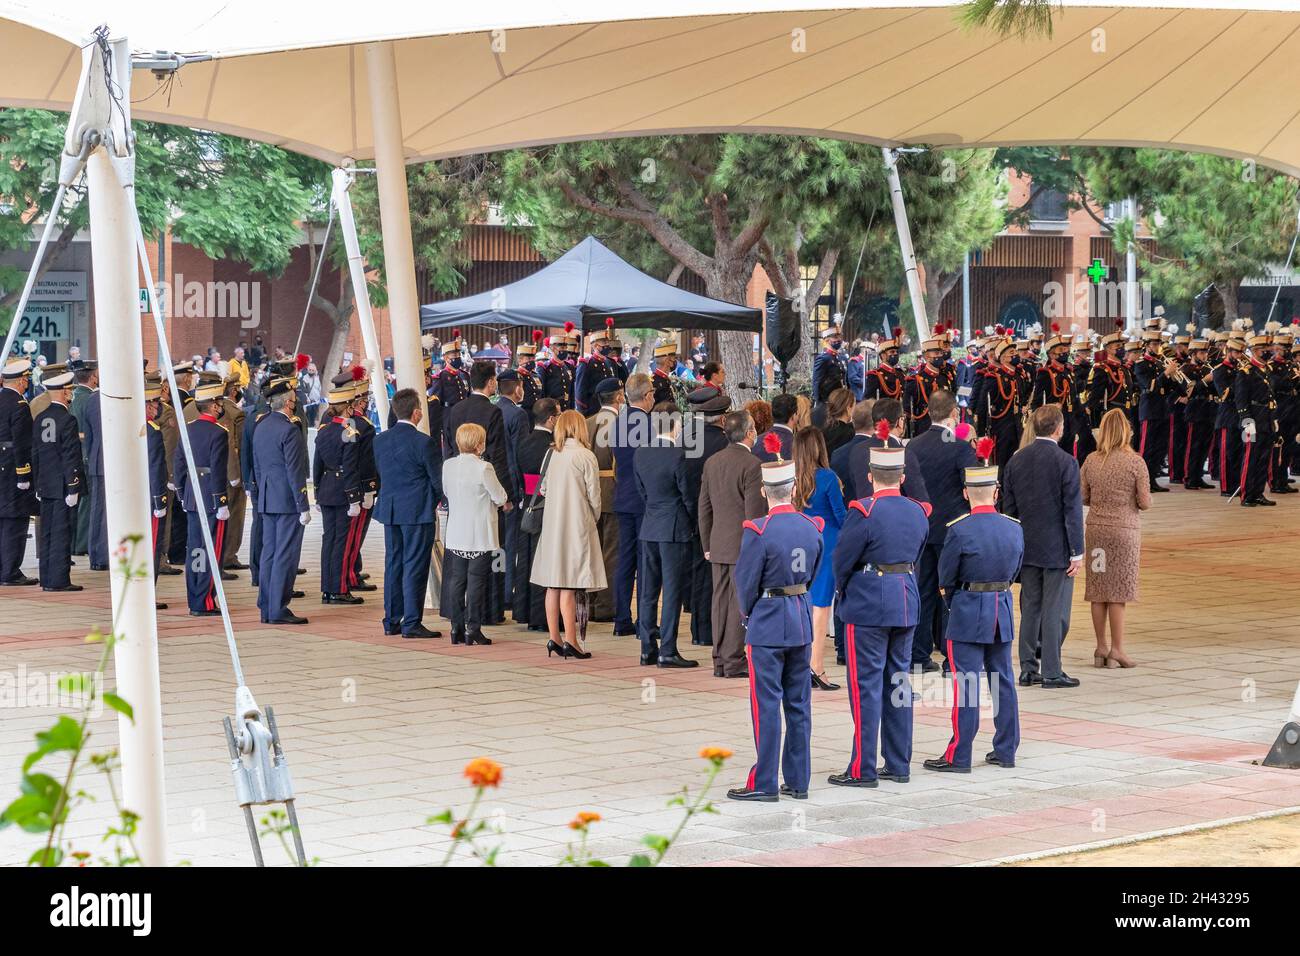 Huelva, Spain - October 30, 2021: Spanish Royal Guard and civilians under a tent on a rainy day prior to the pledge of allegiance to the spanish flag Stock Photo